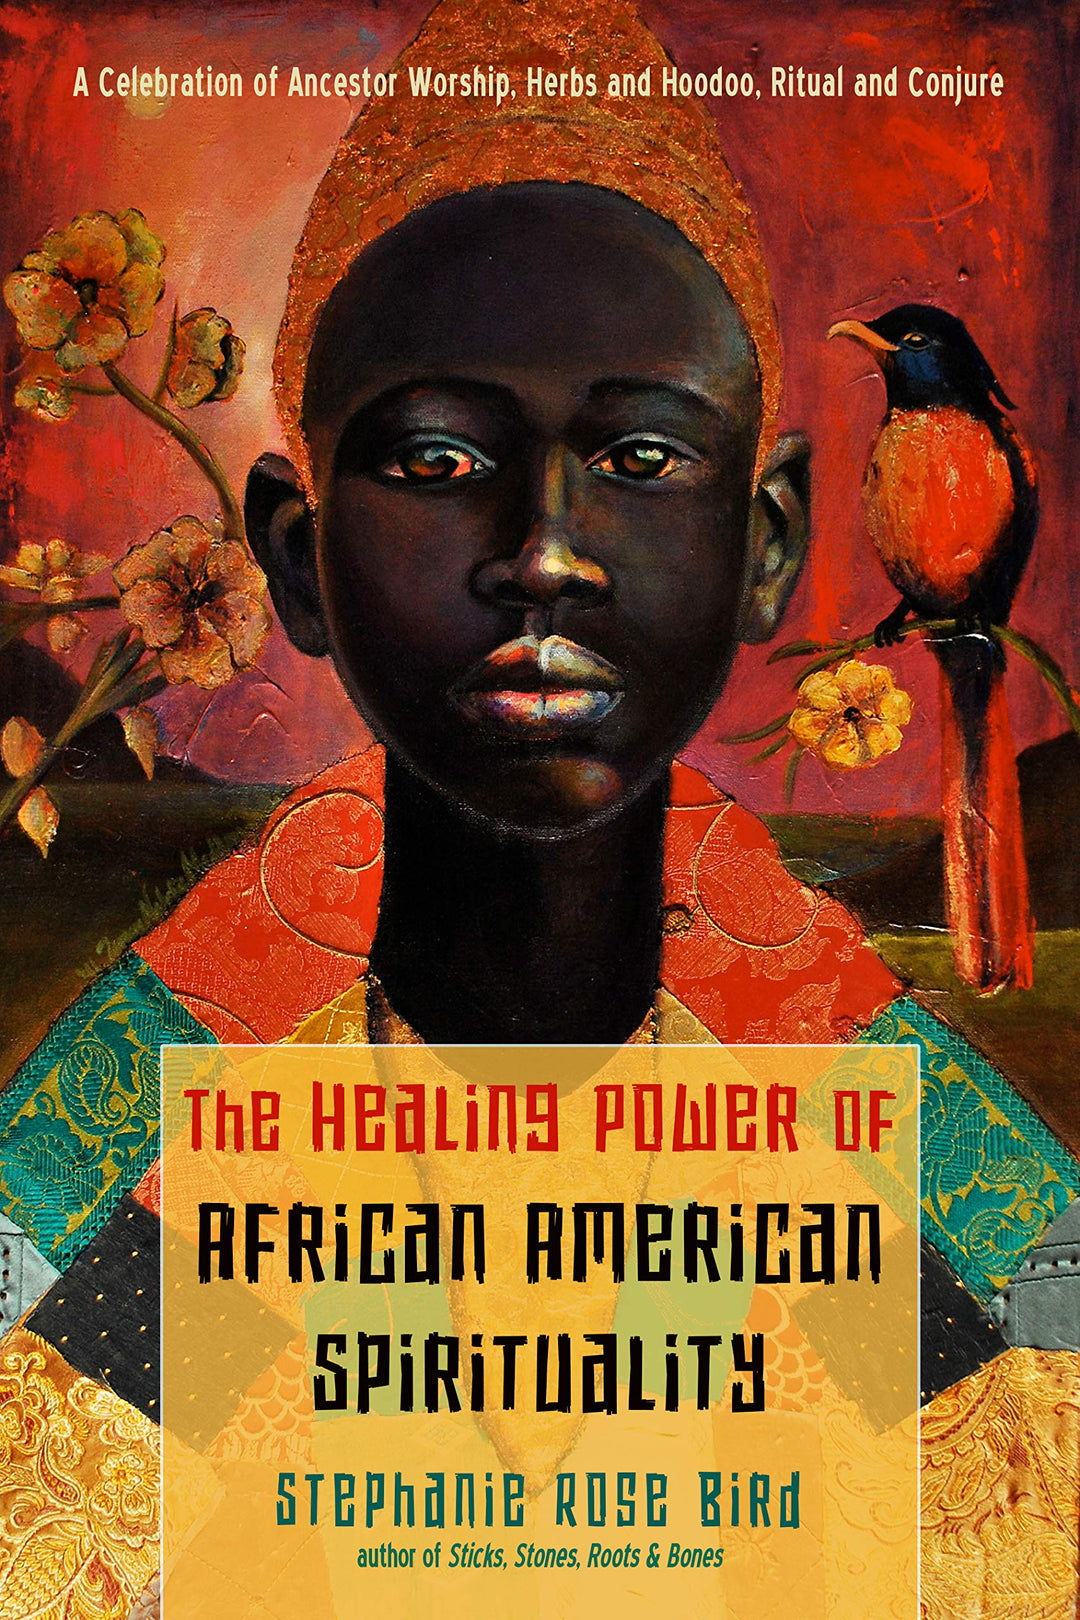 The Healing Power of African-American Spirituality: A Celebration of Ancestor Worship, Herbs and Hoodoo, Ritual and Conjure by Stephanie Rose Bird